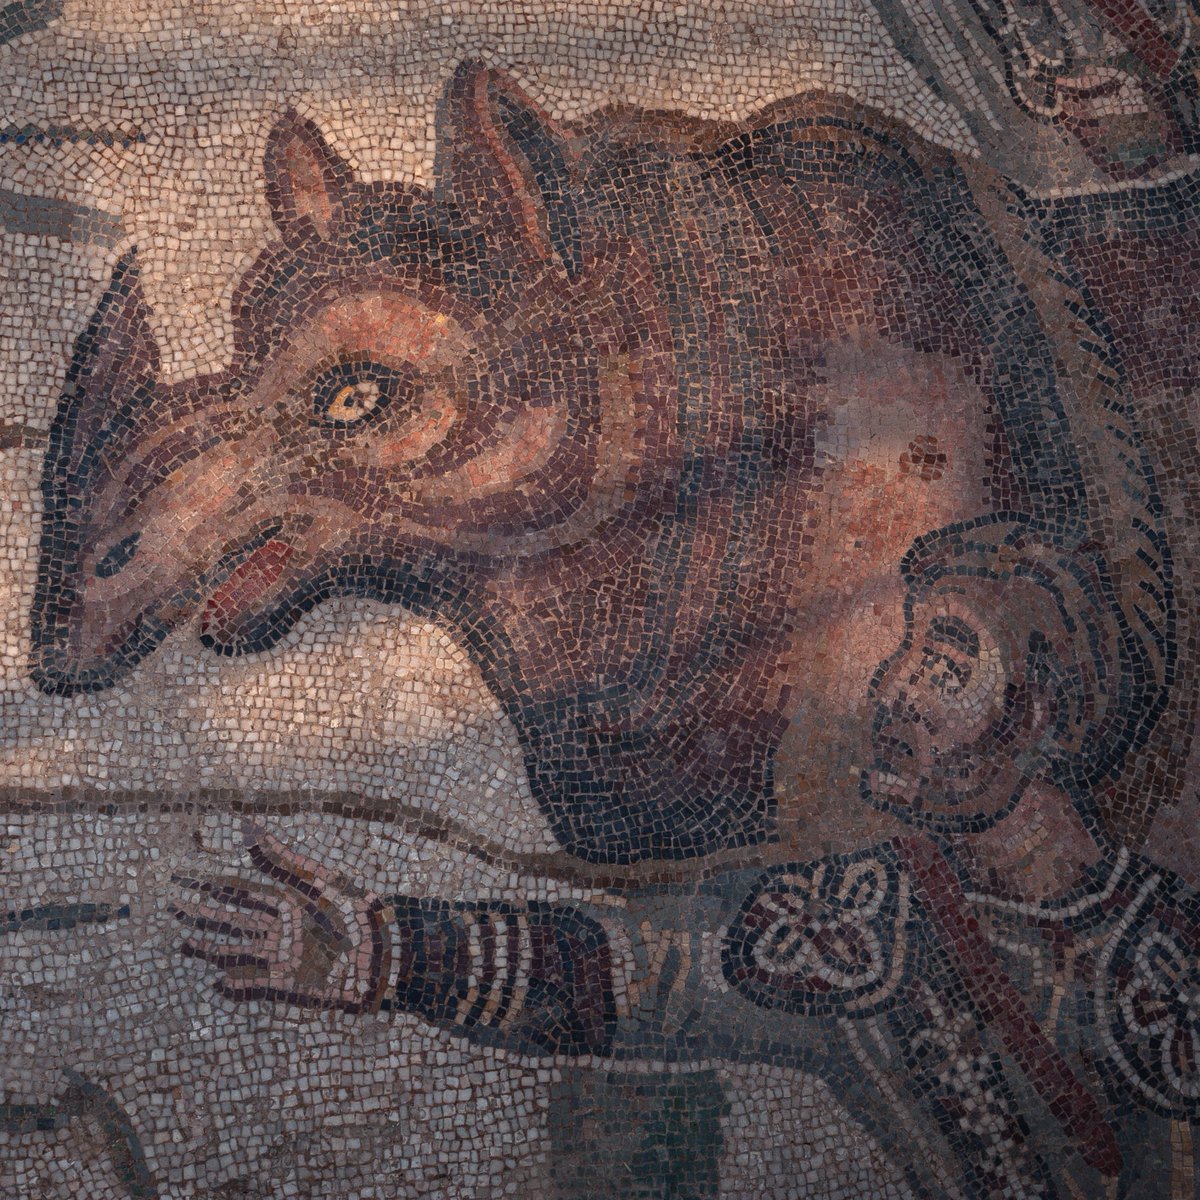 #MosaicMonday

#Rhinoceros with hunter in patterned costume. Detail of Late #Roman mosaic, probably created by African mosaicists, Villa Romana del Casale, Piazza Armerina, Sicily, Italy:

alamy.com/portfolio/tere…